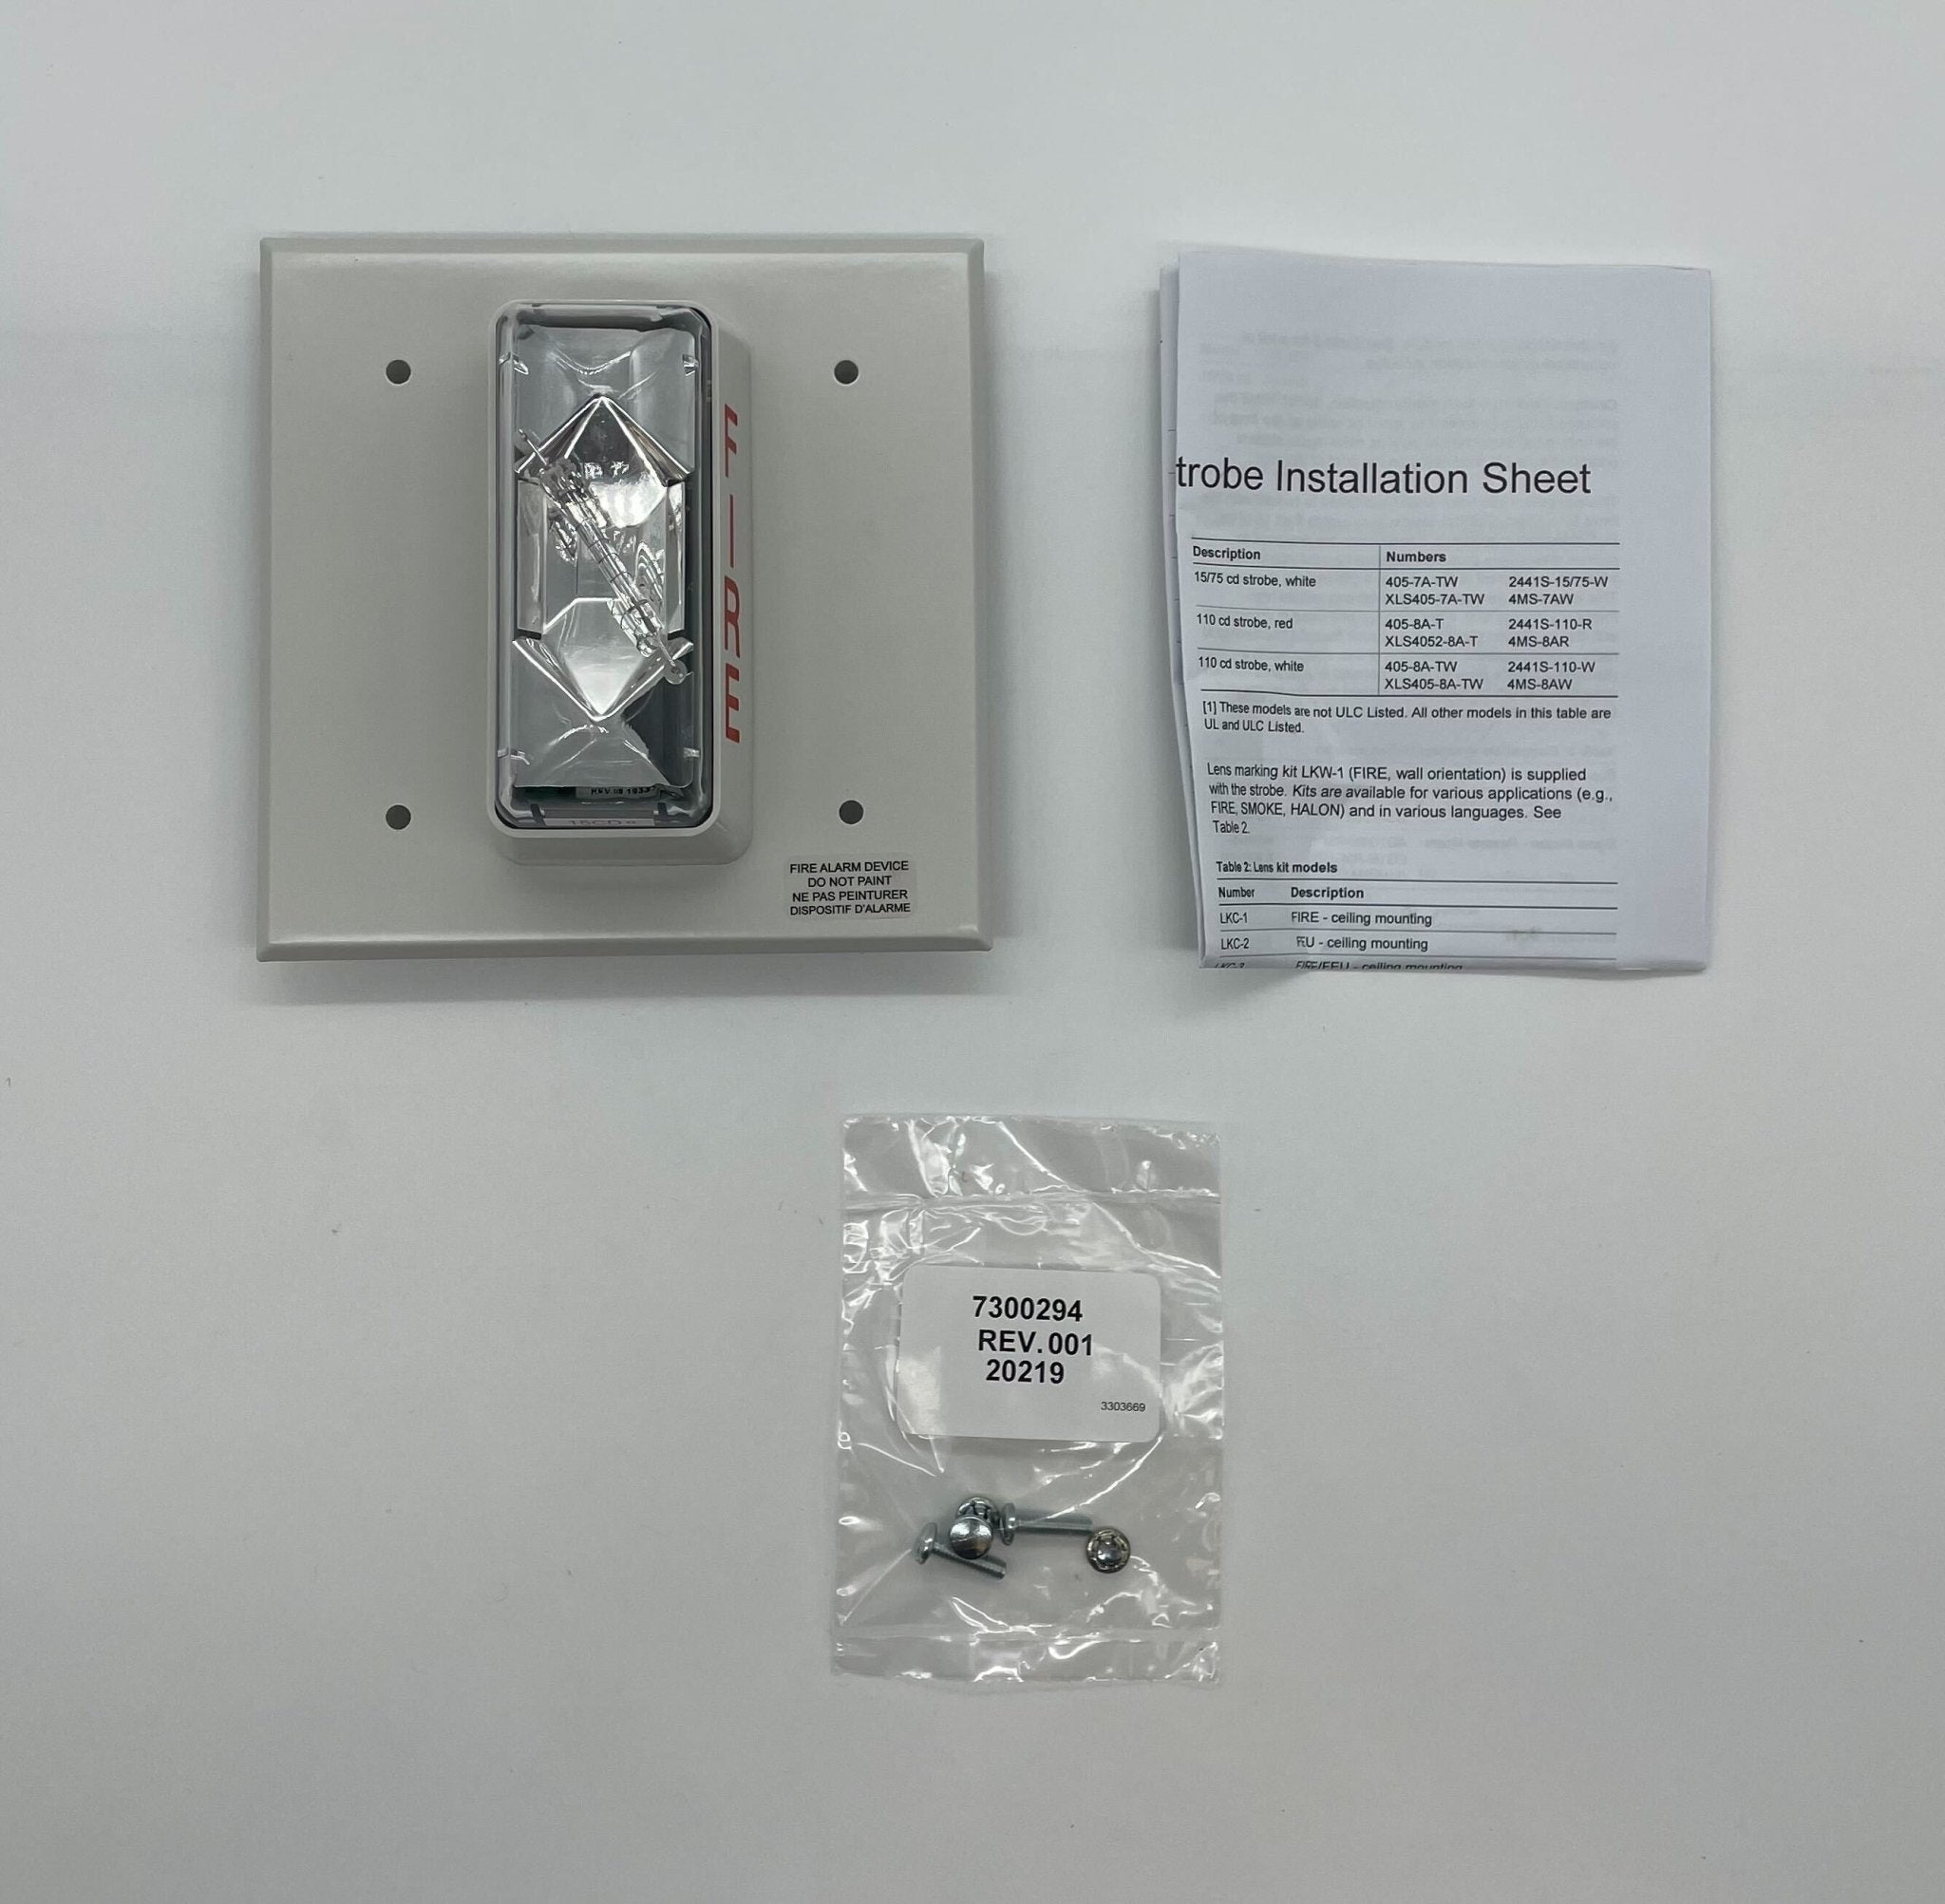 Edwards 405-5A-TW - The Fire Alarm Supplier